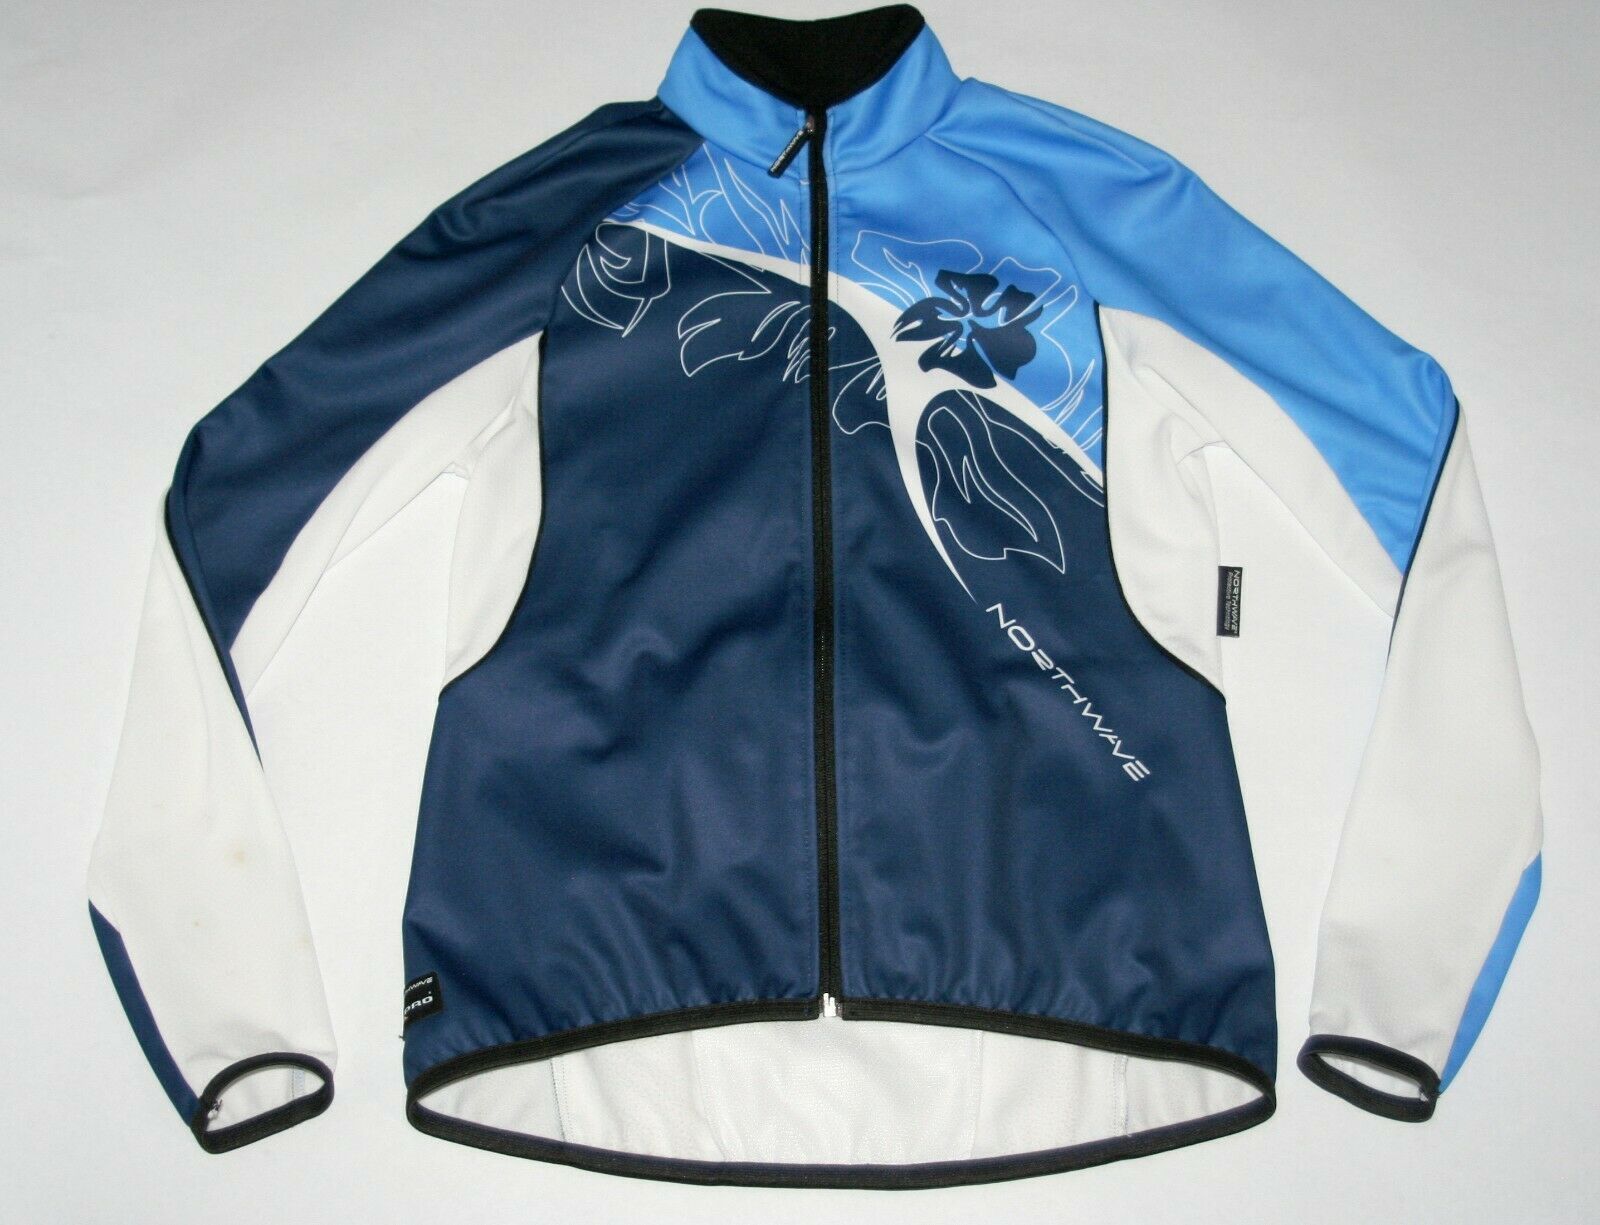 Primary image for NorthWave Cycling Softshell Cold Weather Jacket Full Zip White Blue Women Medium